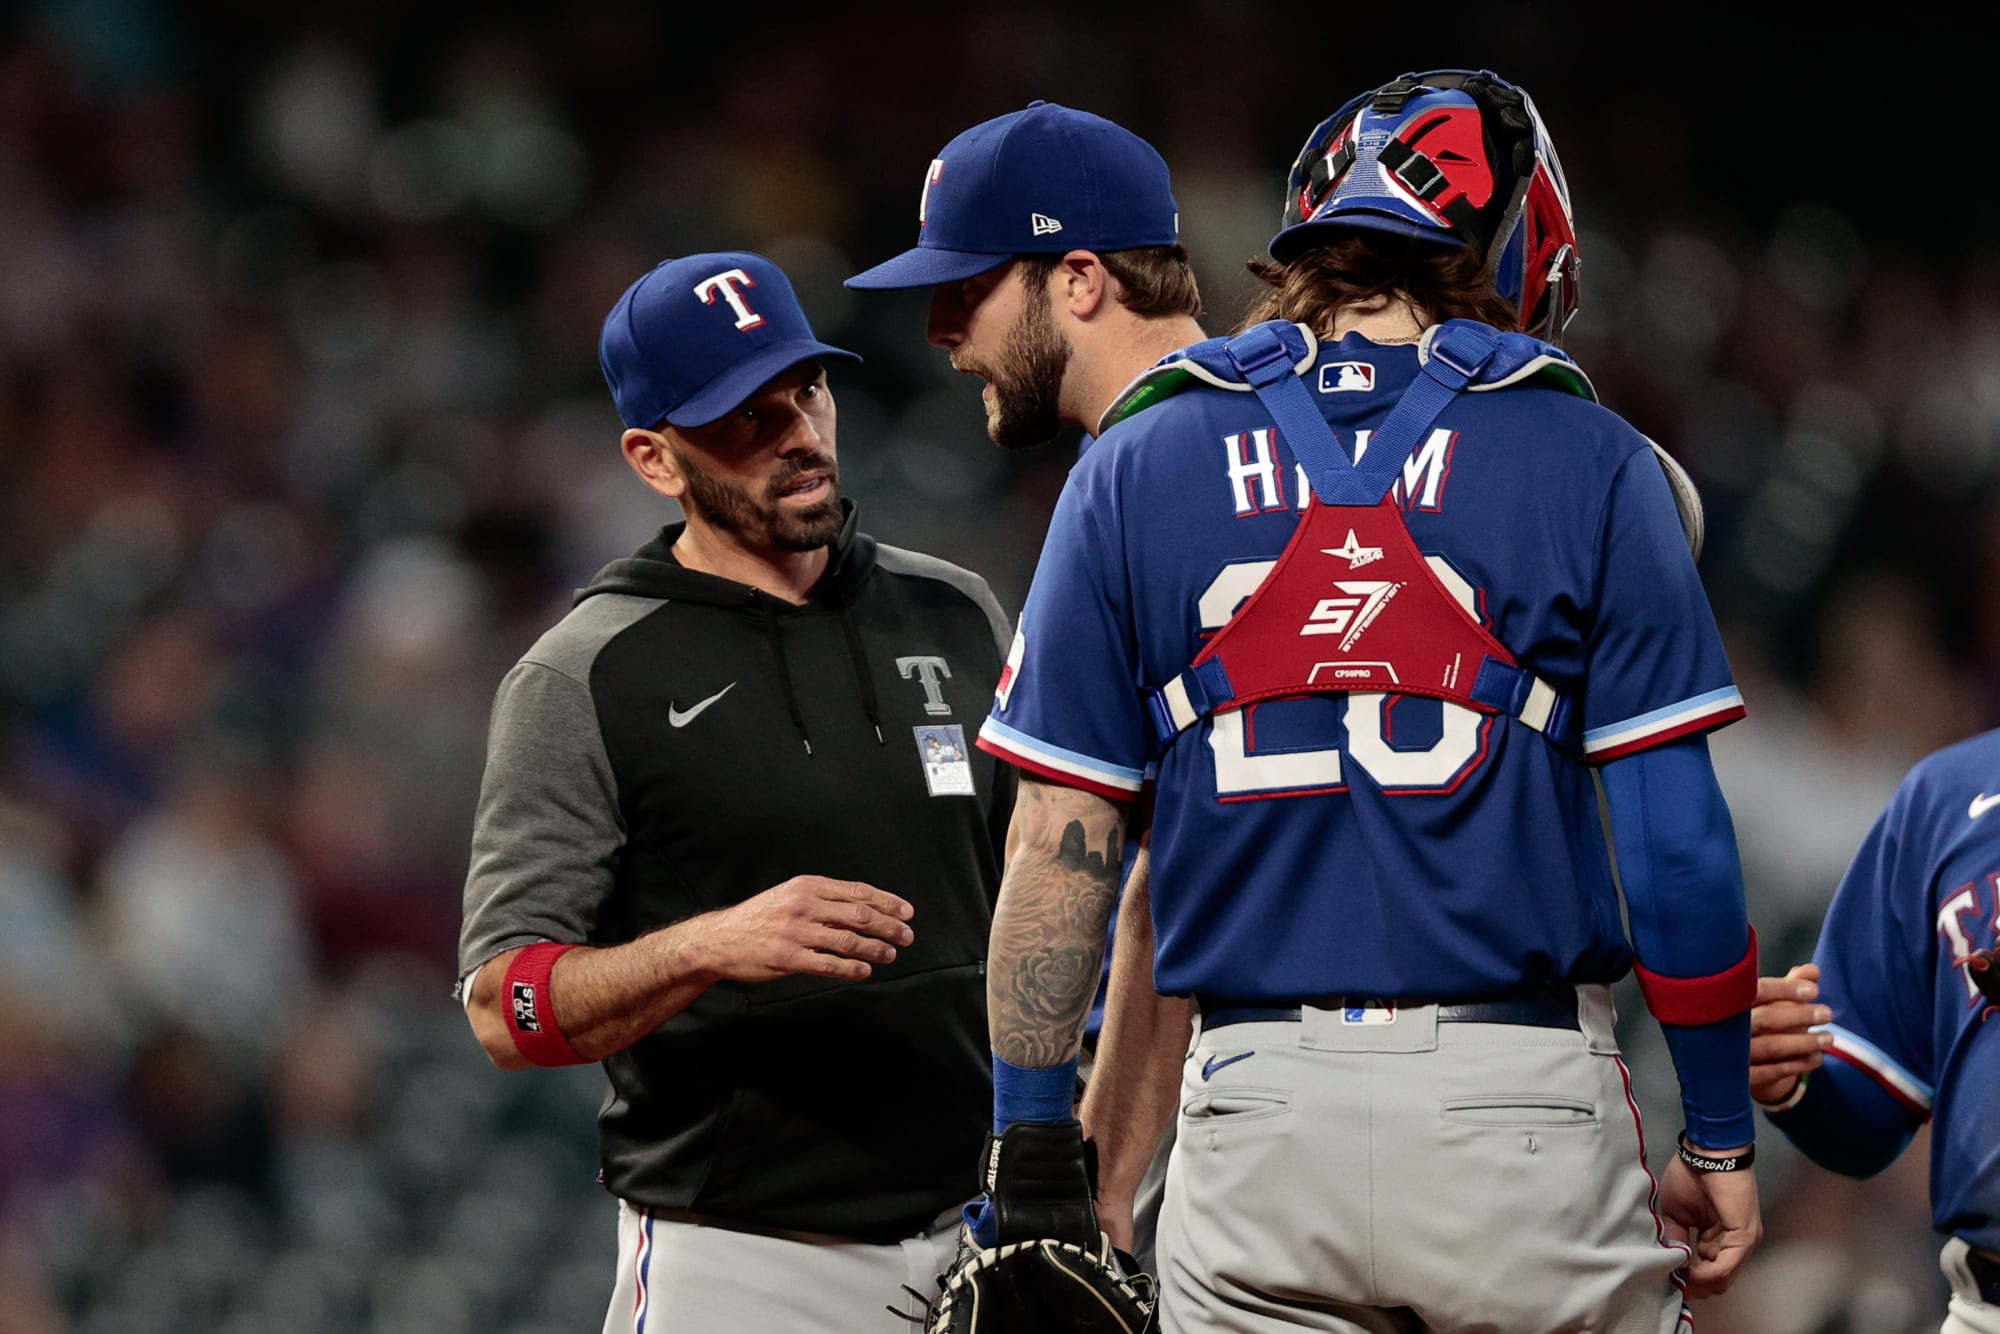 Texas Rangers finish improbable 015 road stretch in last 15 road games